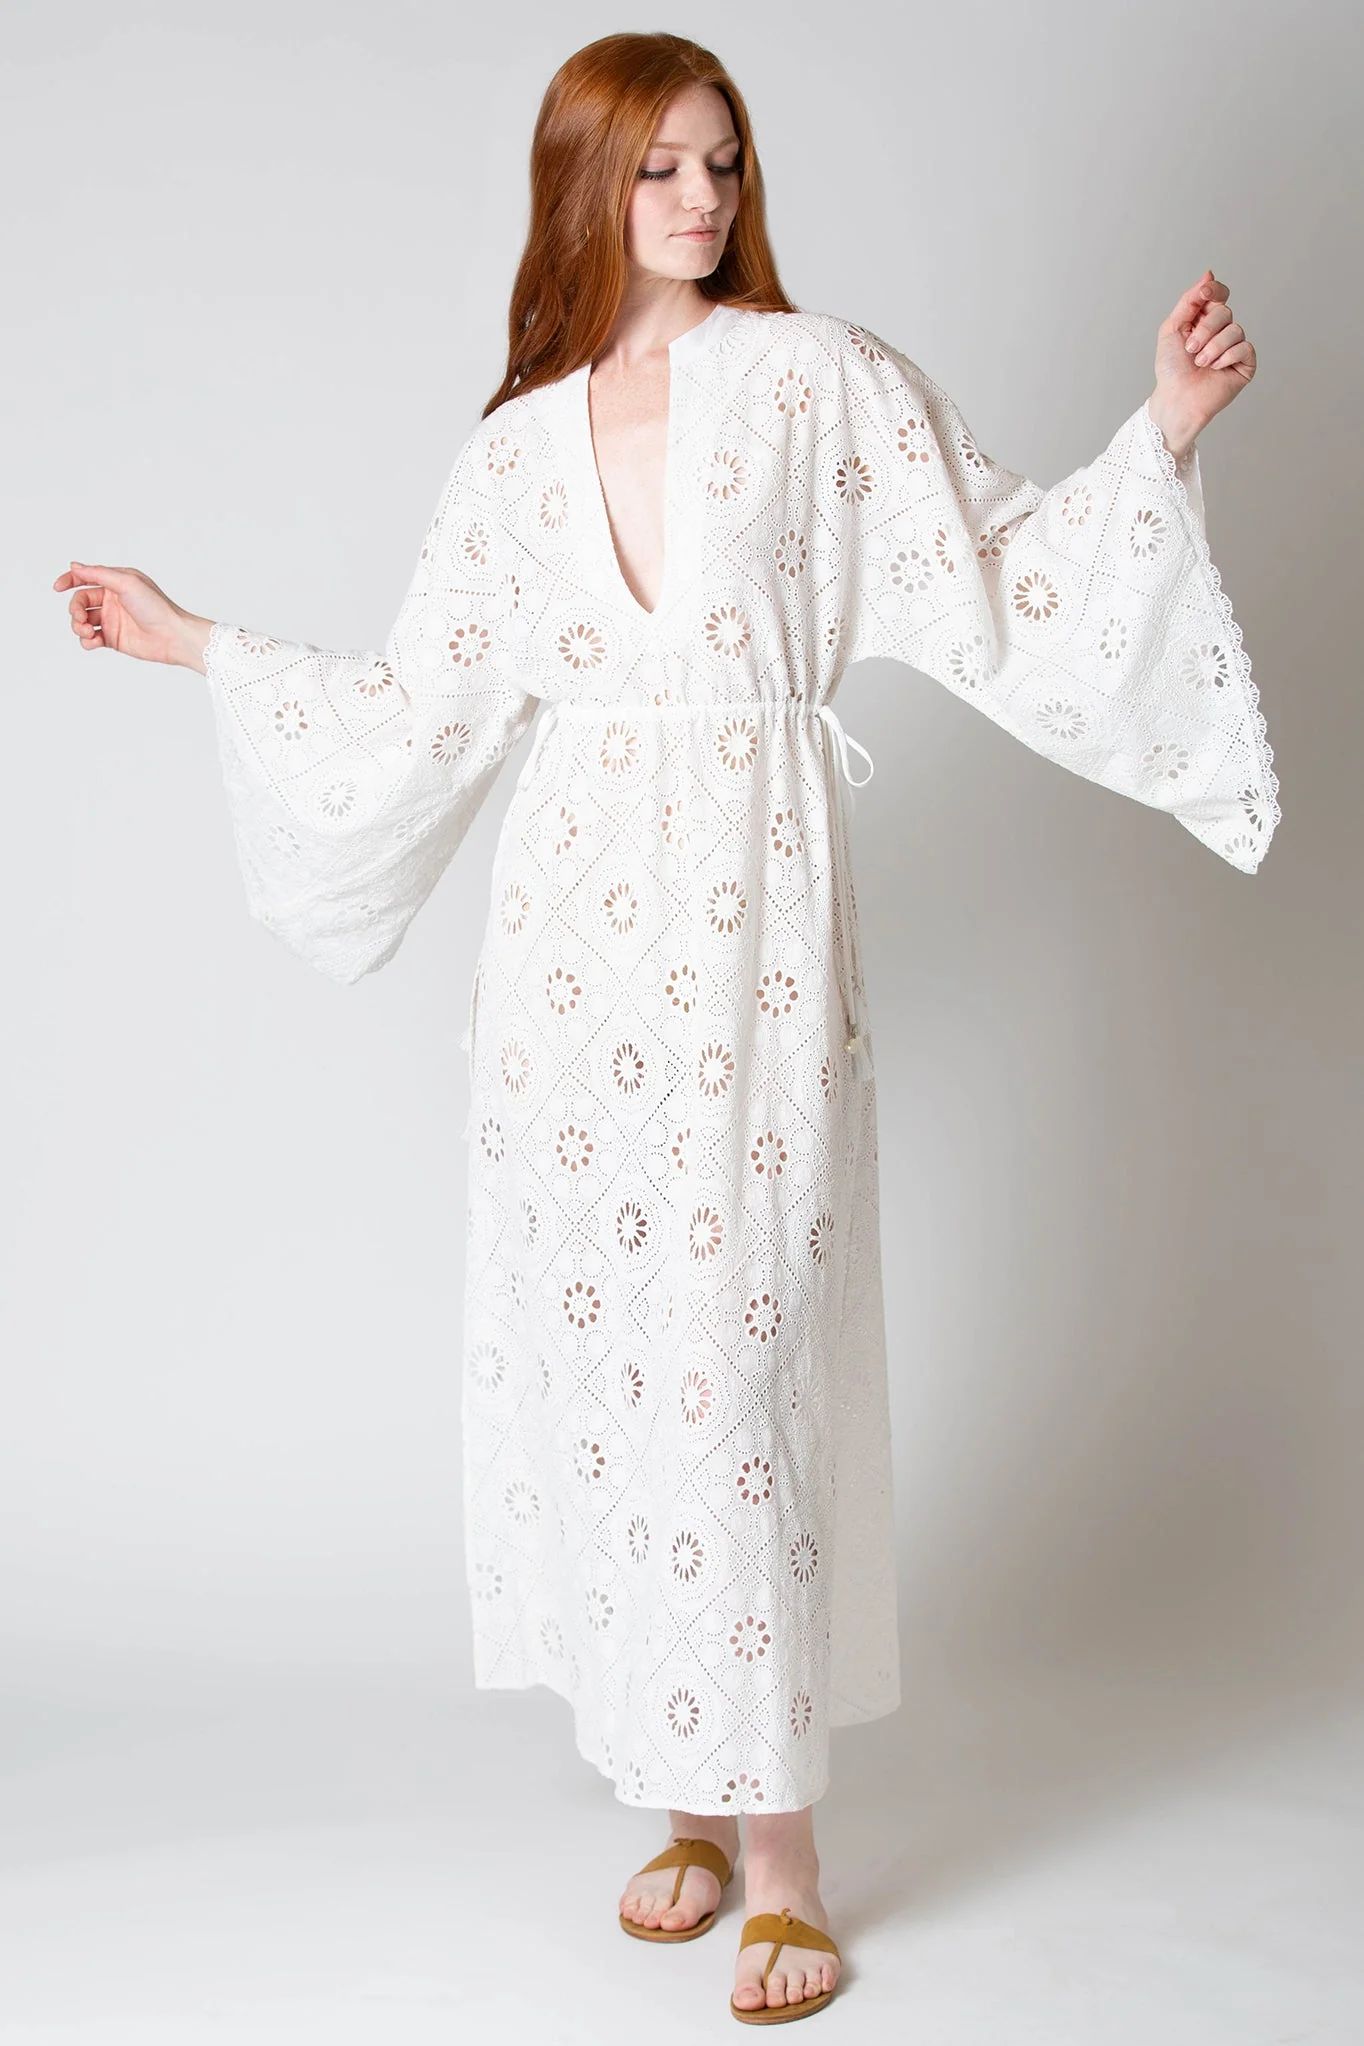 Ieva Diamond Eyelet Embroidered Caftan by Miguelina | Support HerStory